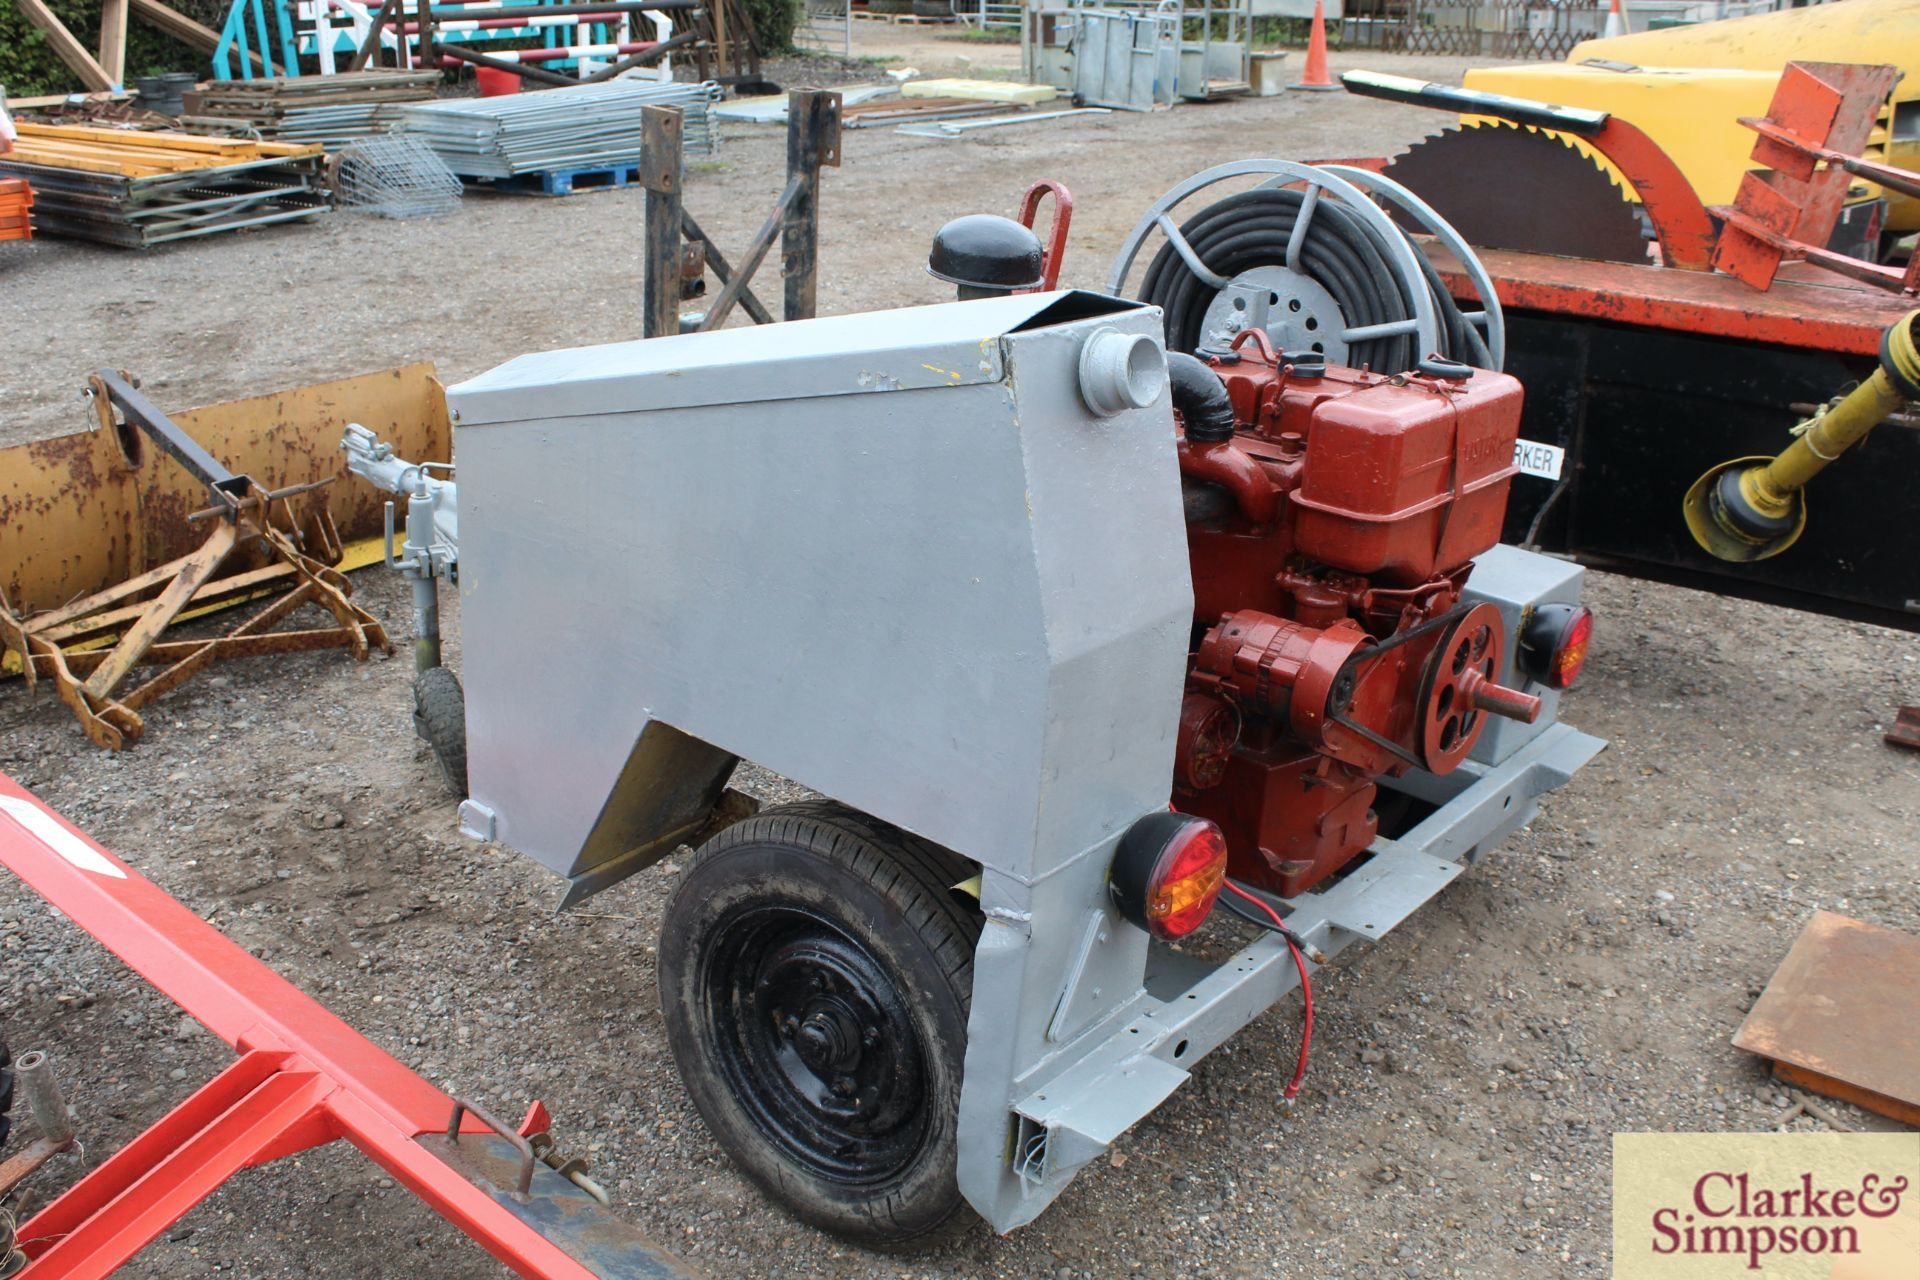 Harben fast tow high pressure drain jetter. With Lister diesel engine. - Image 3 of 8